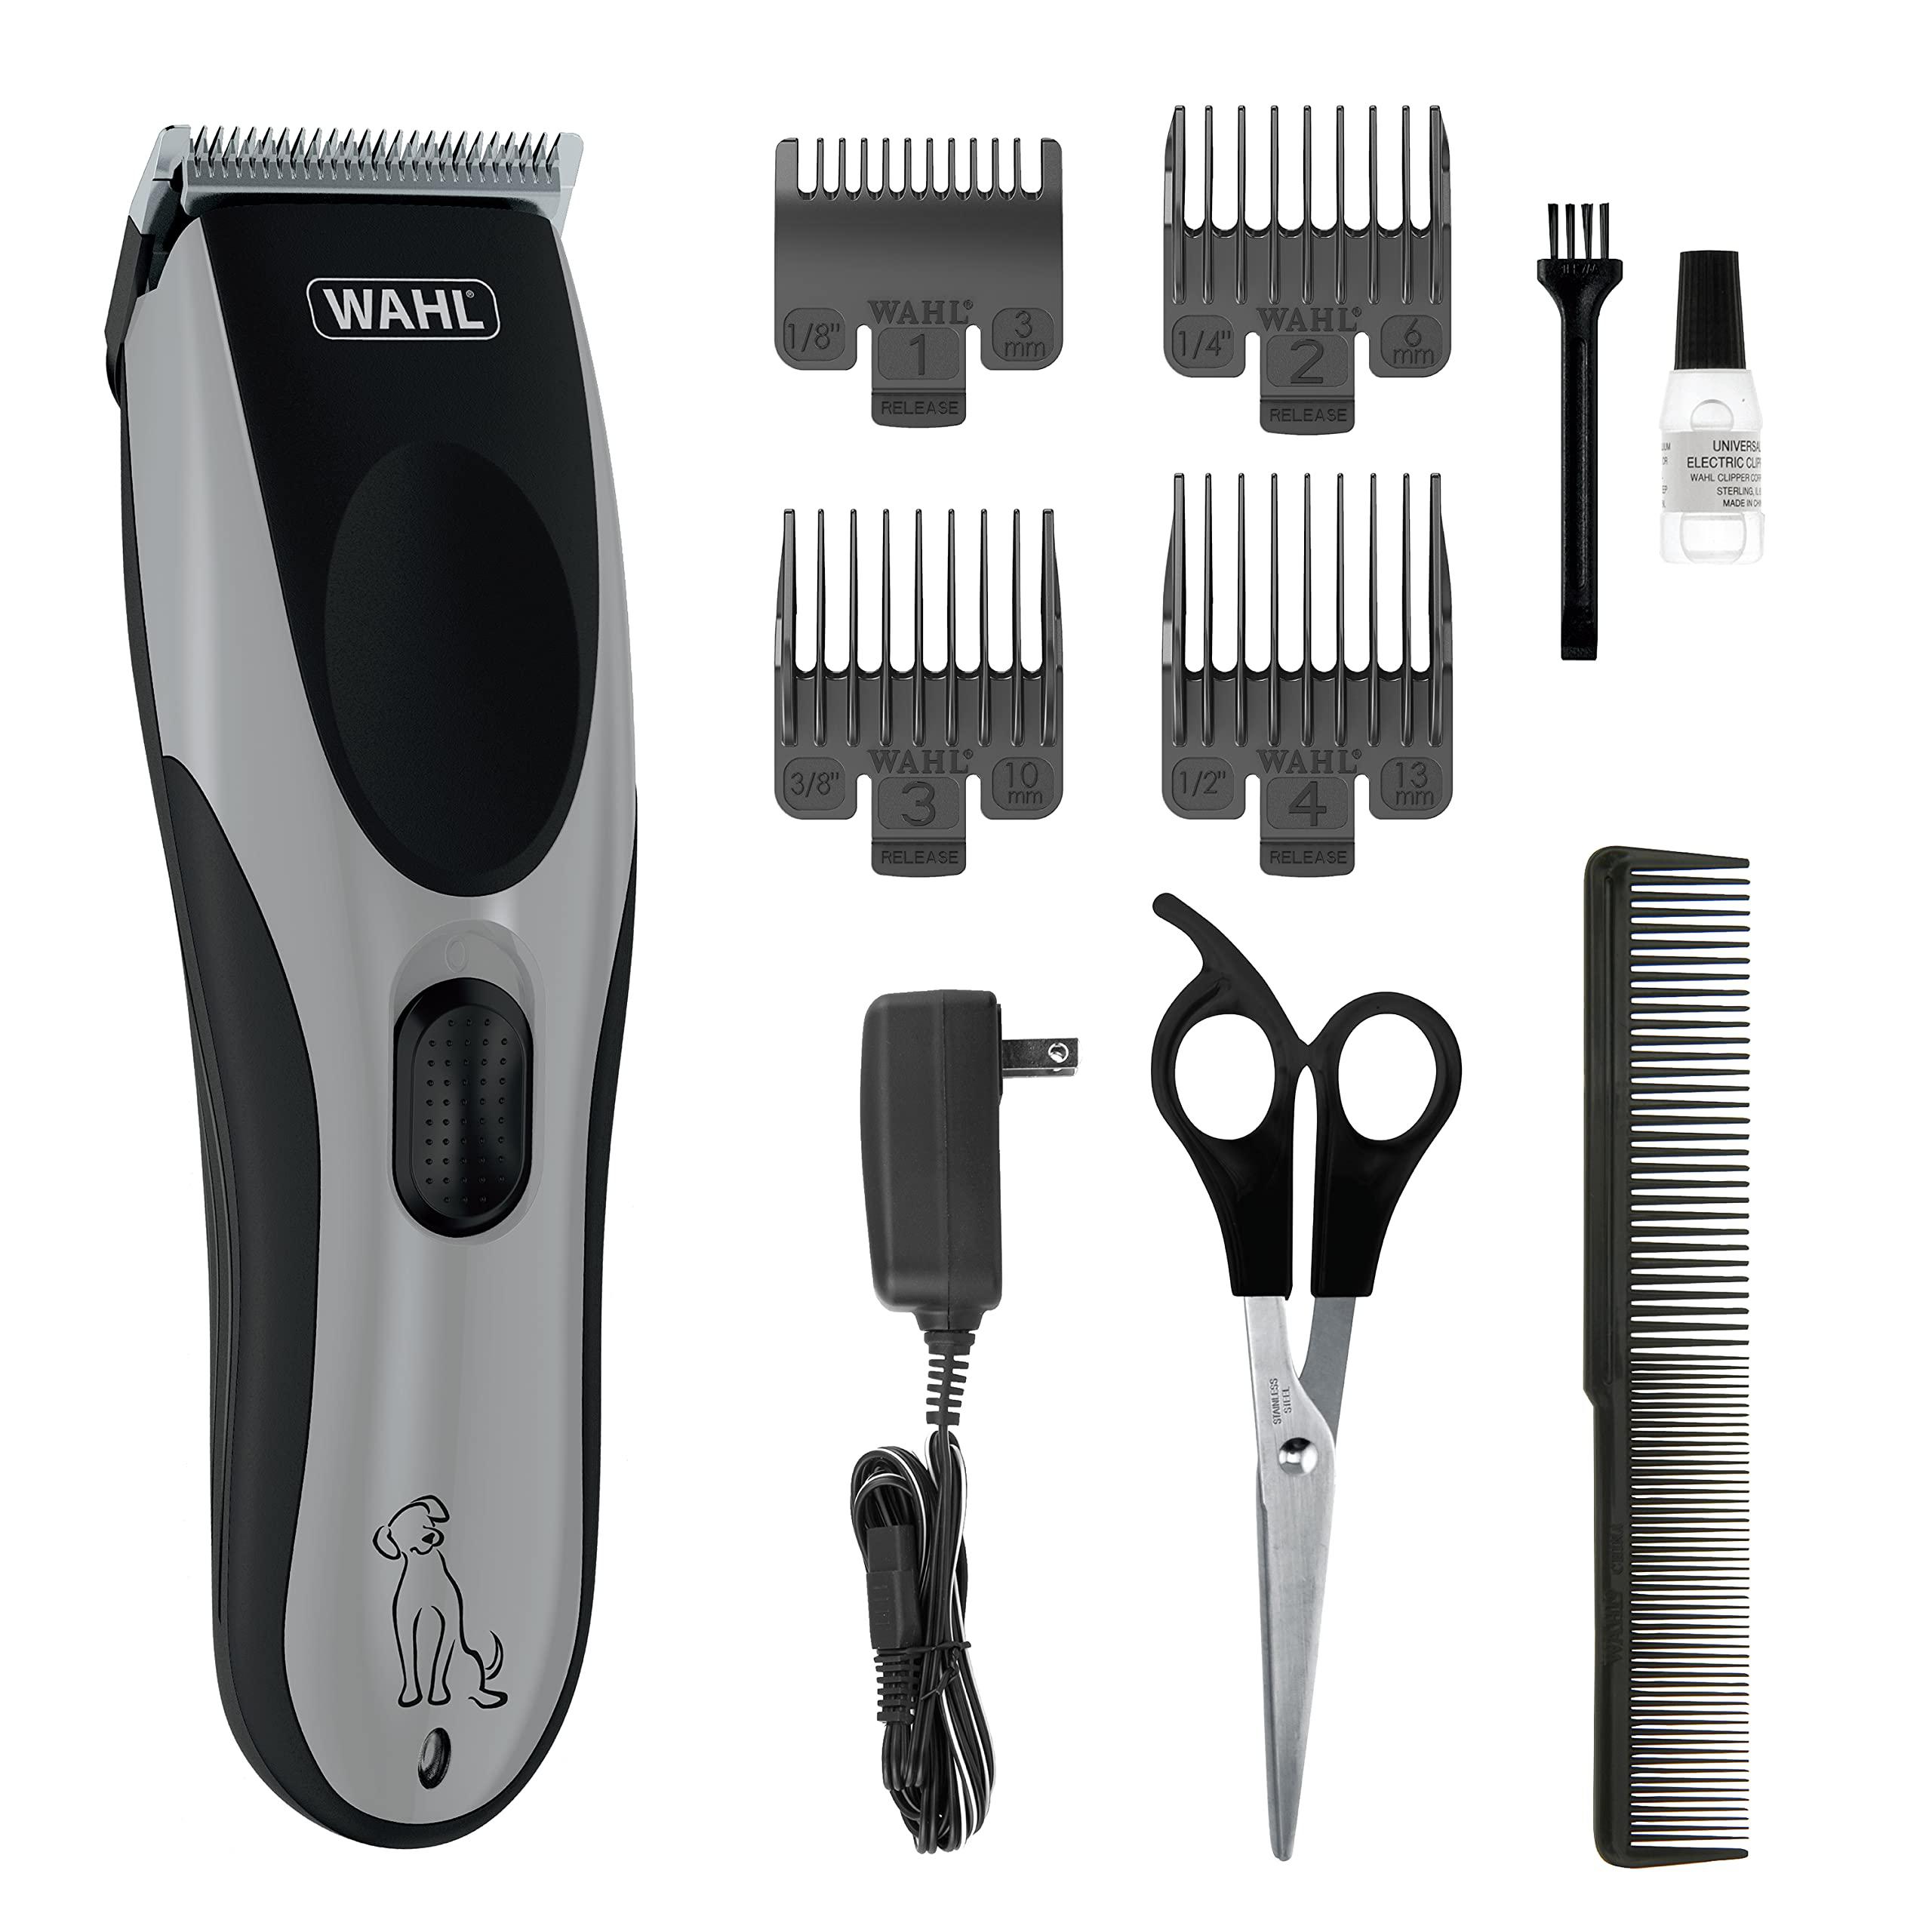 WAHL Easy Pro for Pets, Rechargeable Dog Grooming Kit - Electric Dog Clippers for Dogs & Cats with Fine to Medium Coats - Model 